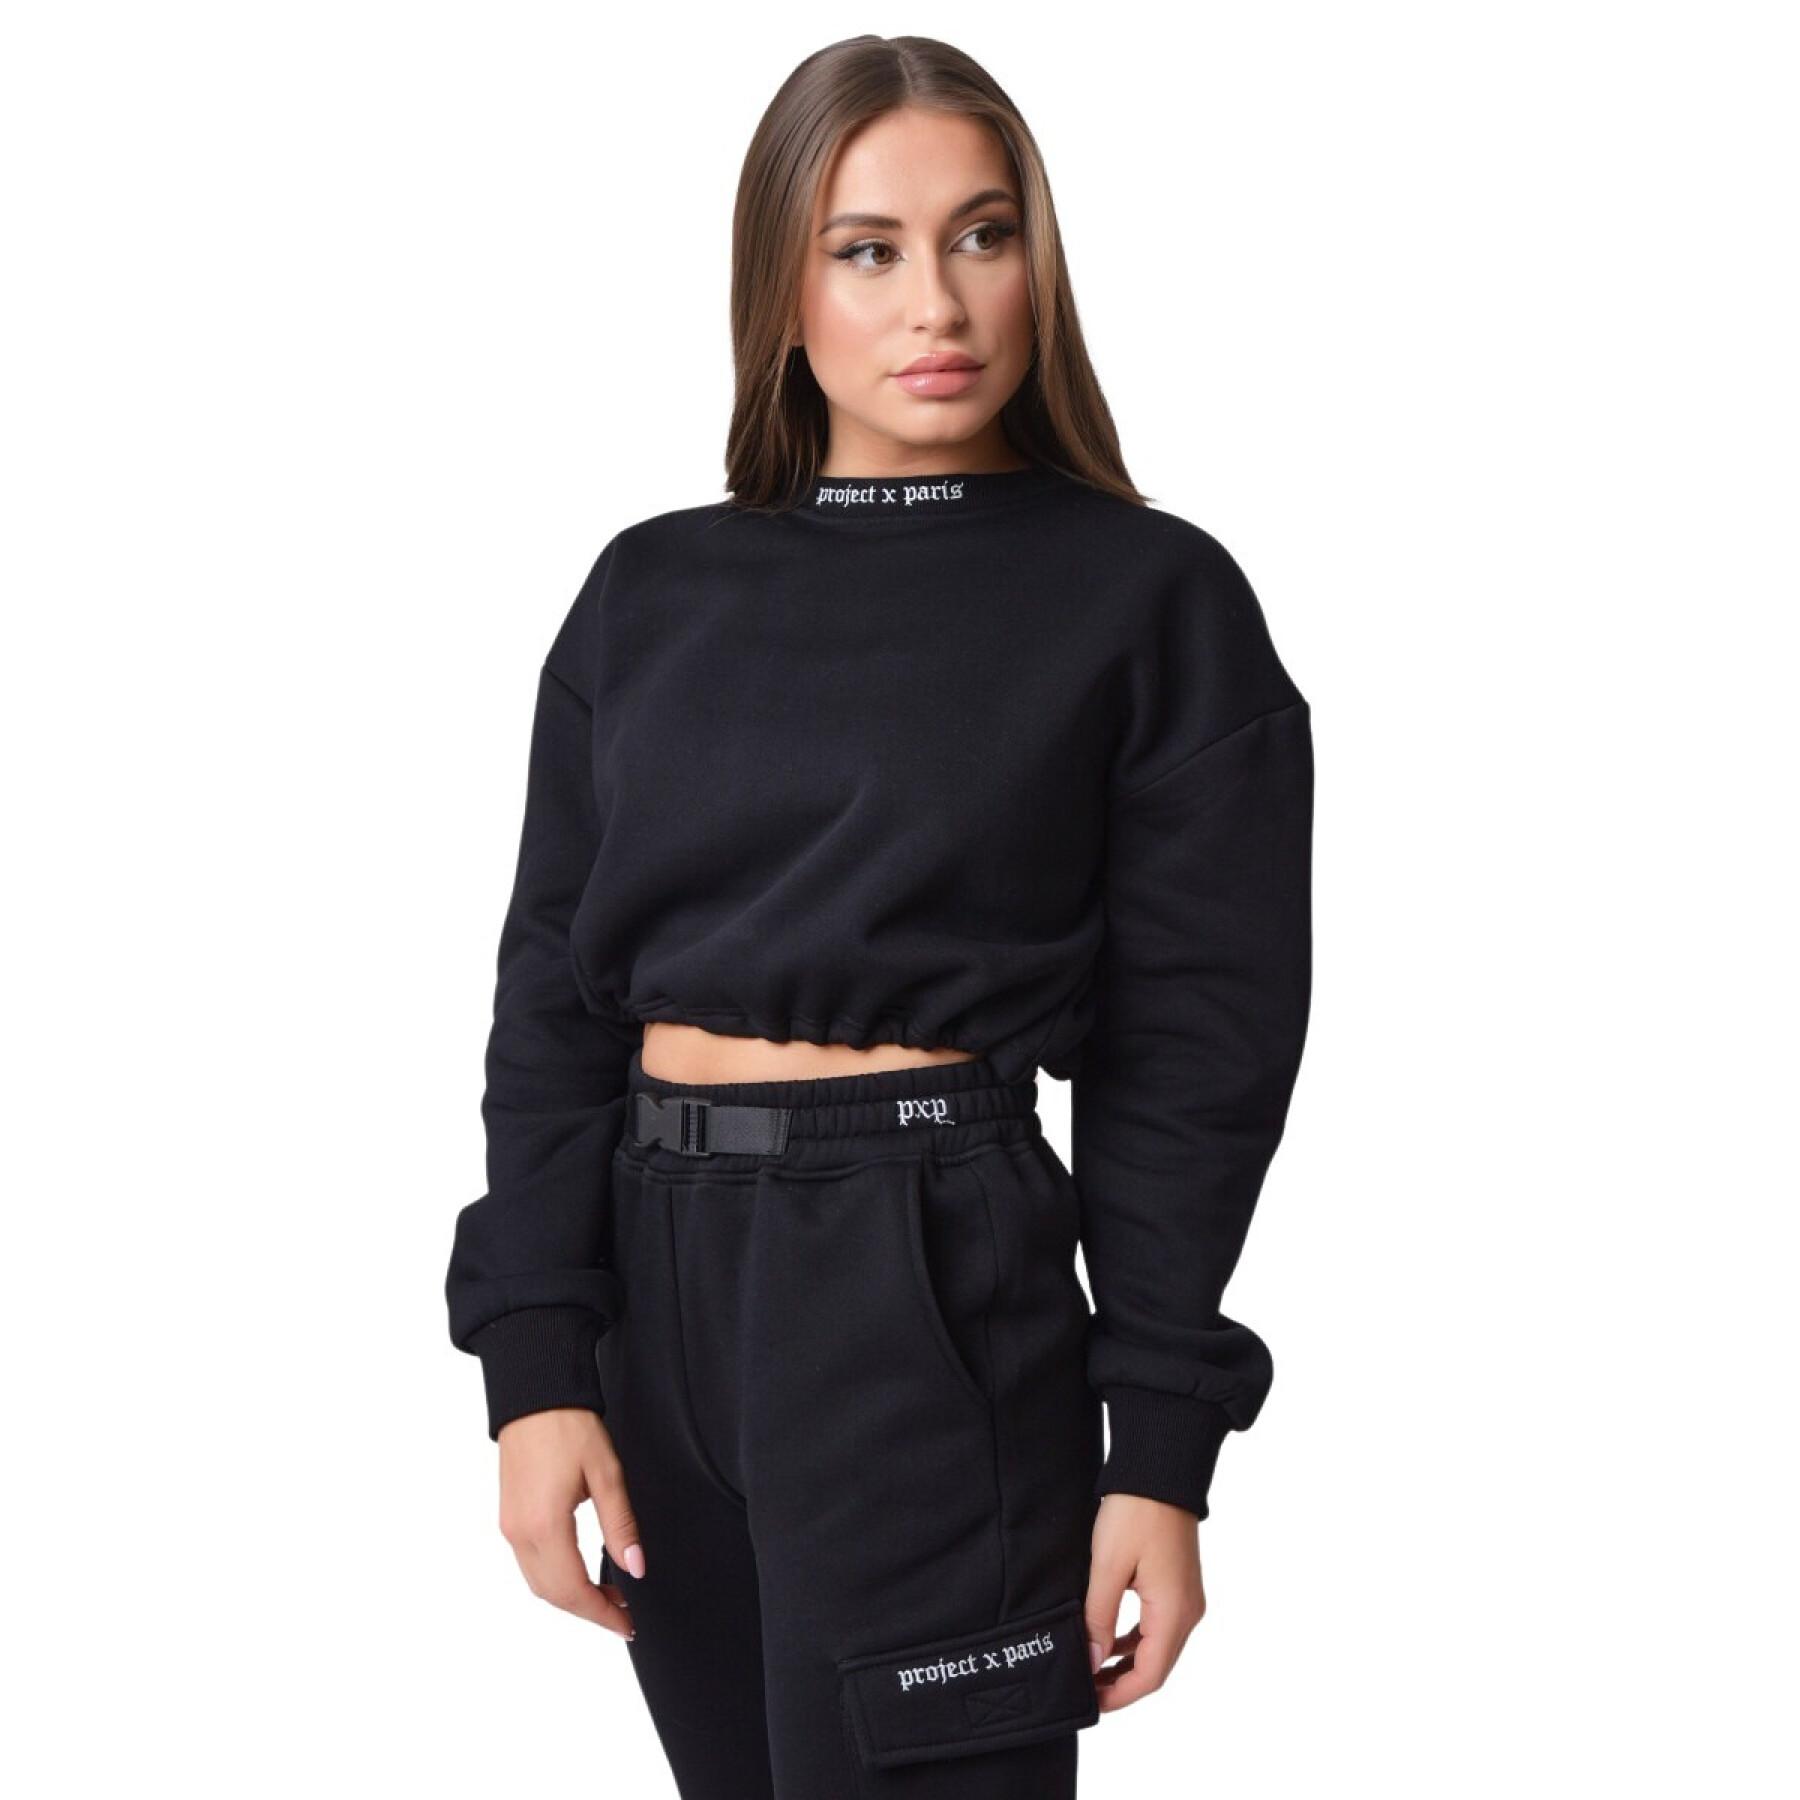 Short sweatshirt with gothic style collar for women Project X Paris